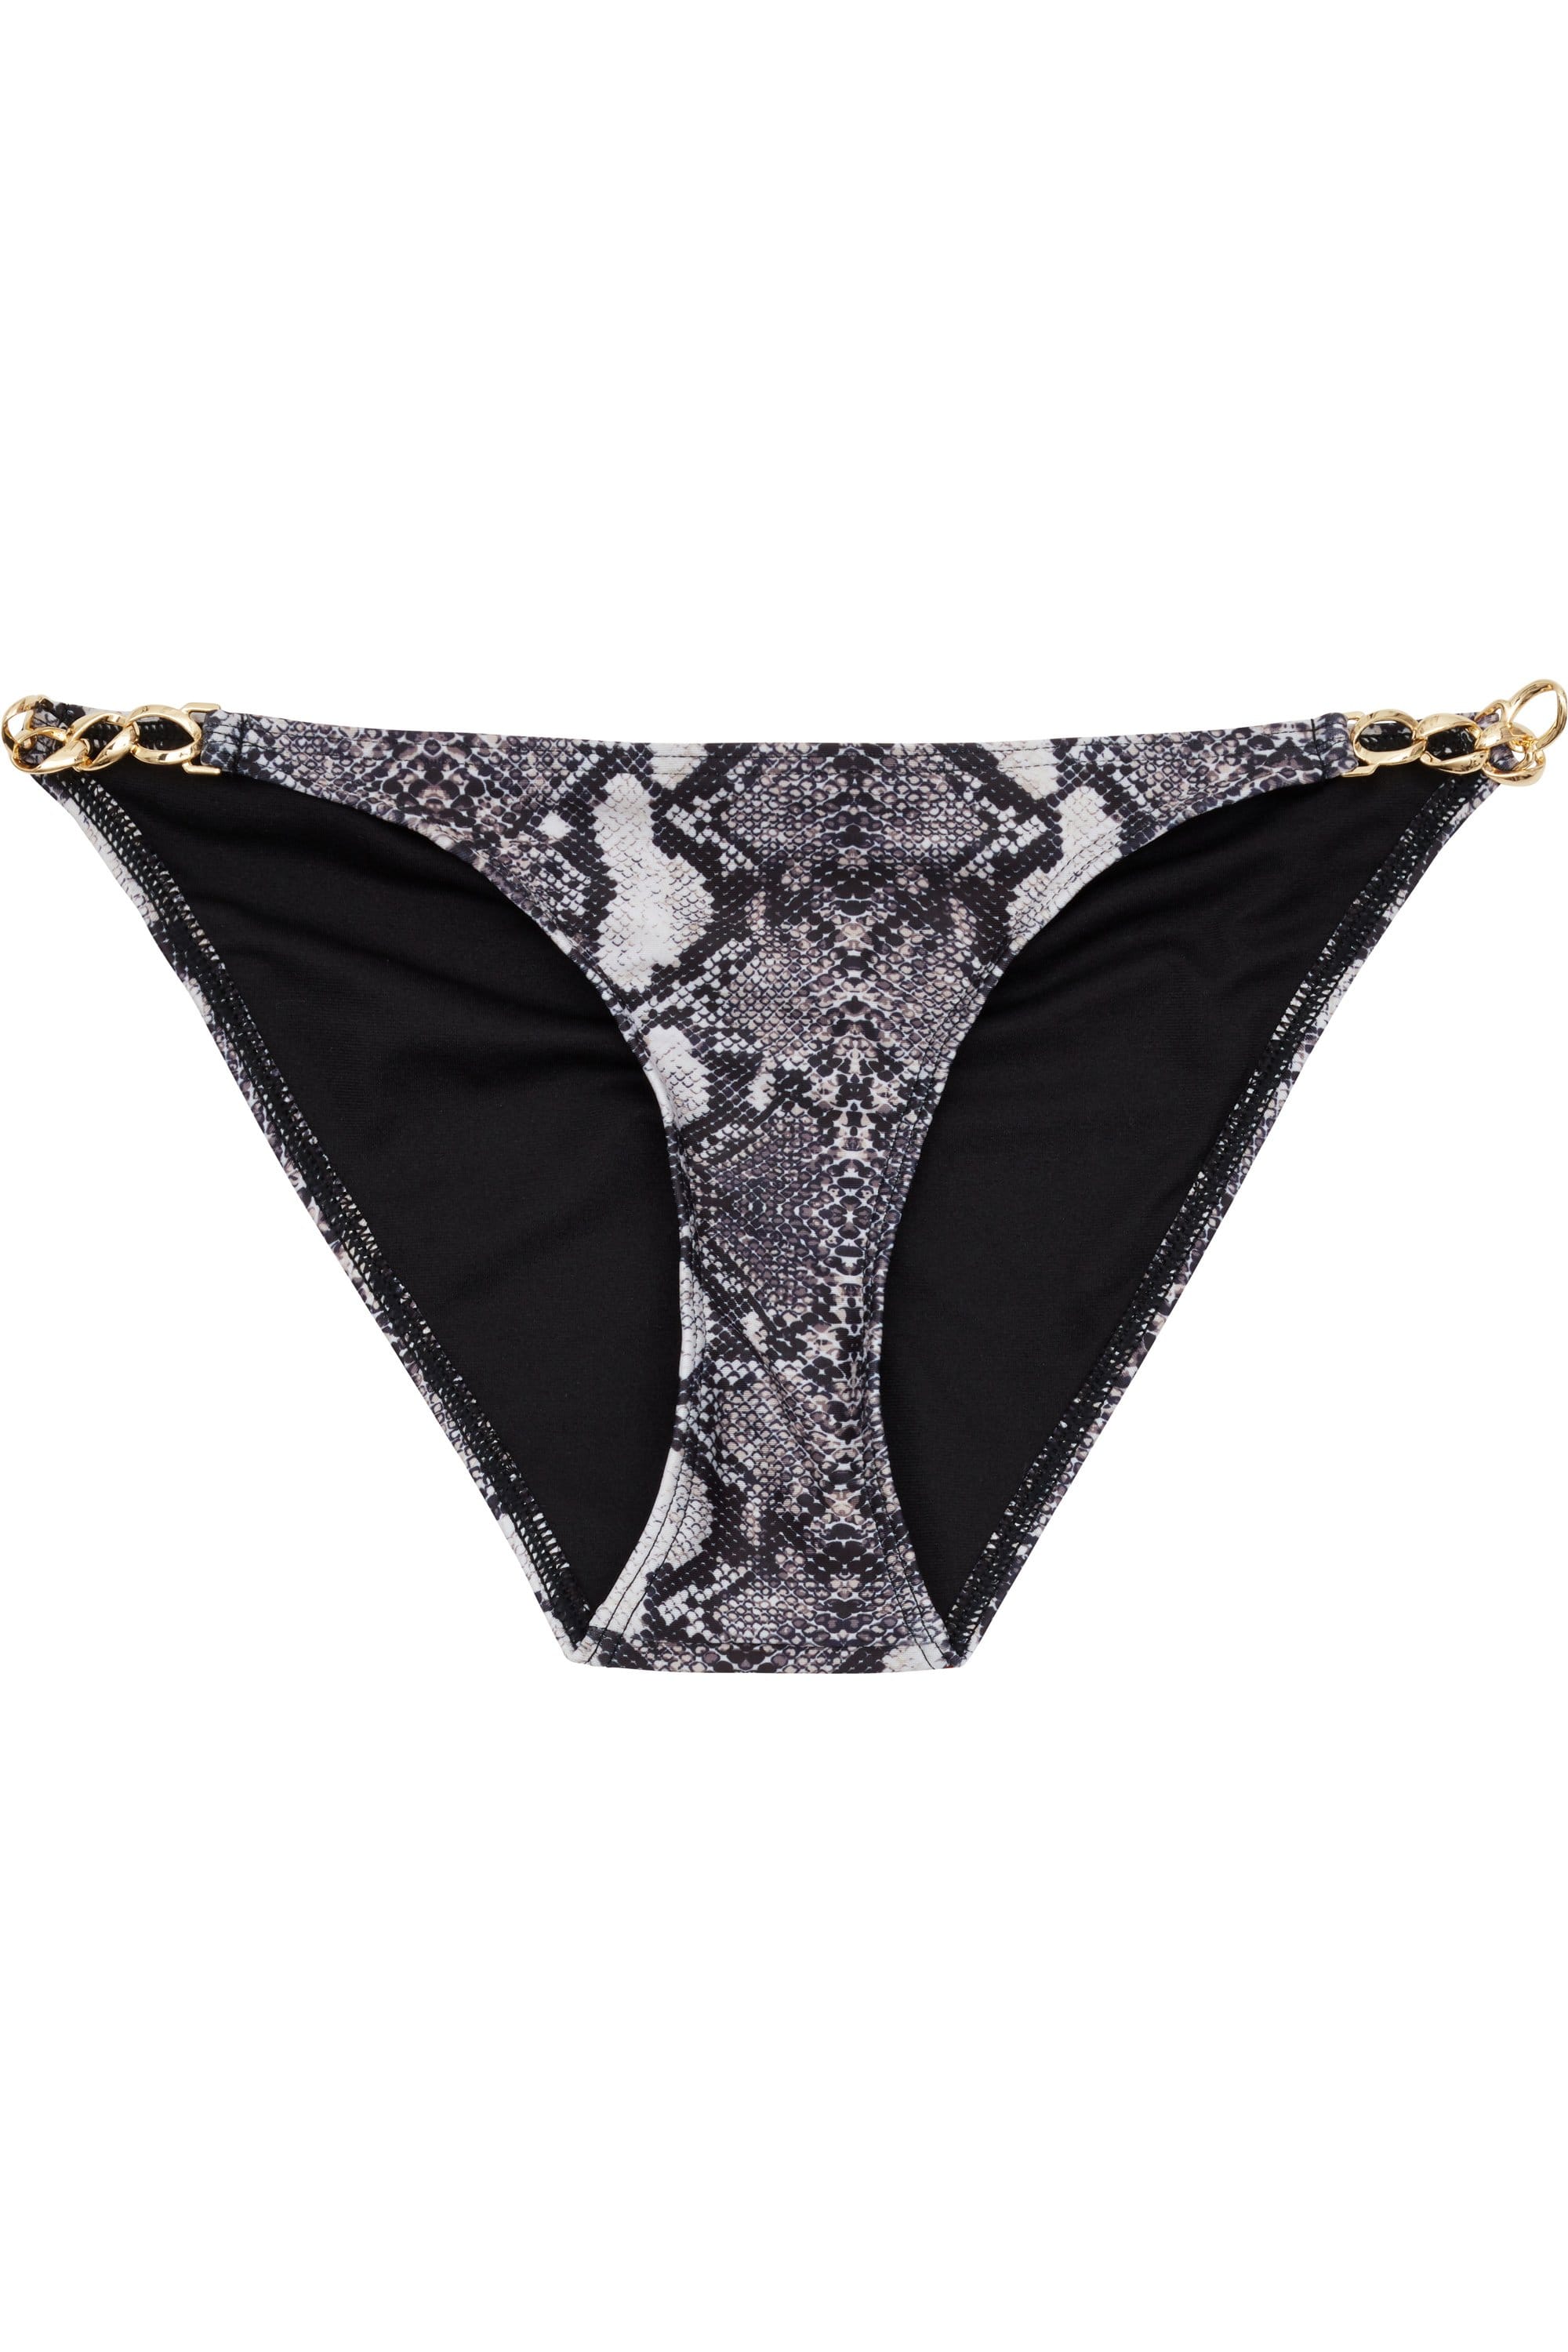 Eco Snakeskin chain hipster brief